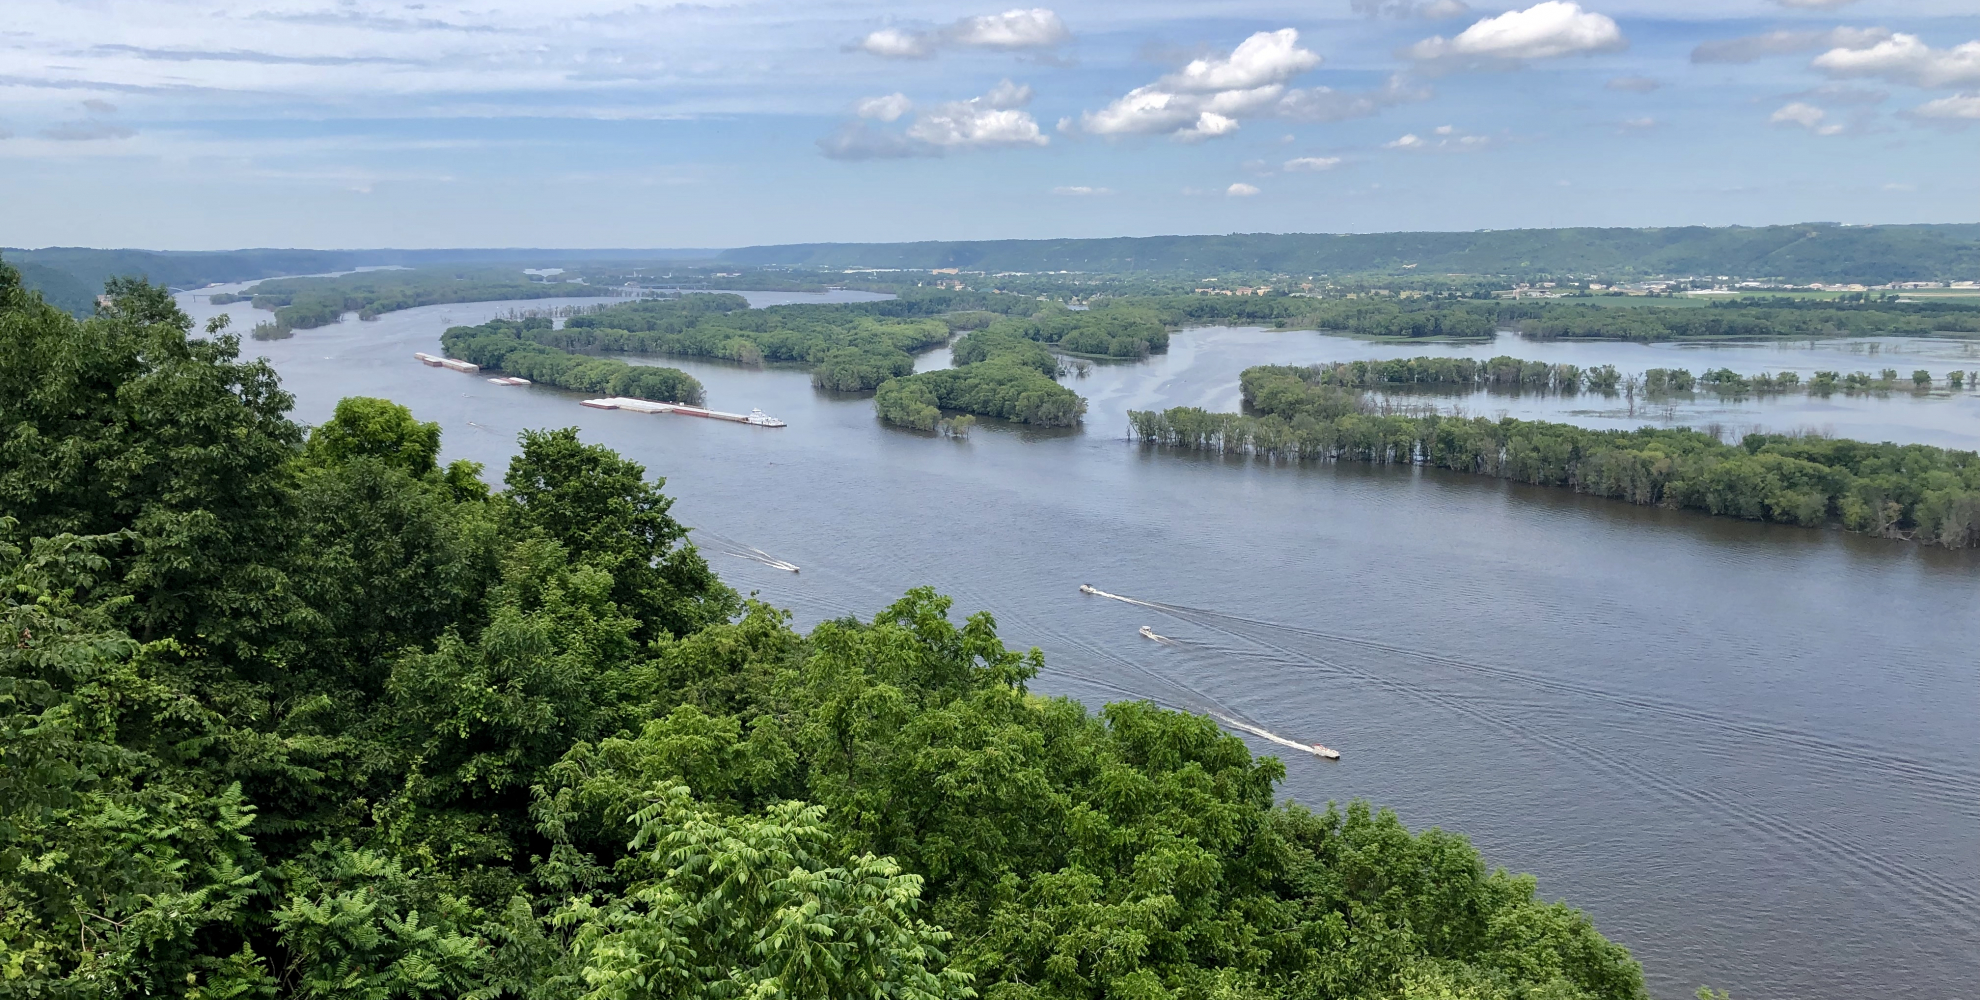 Overlook of the Upper Mississippi River with barge traffic